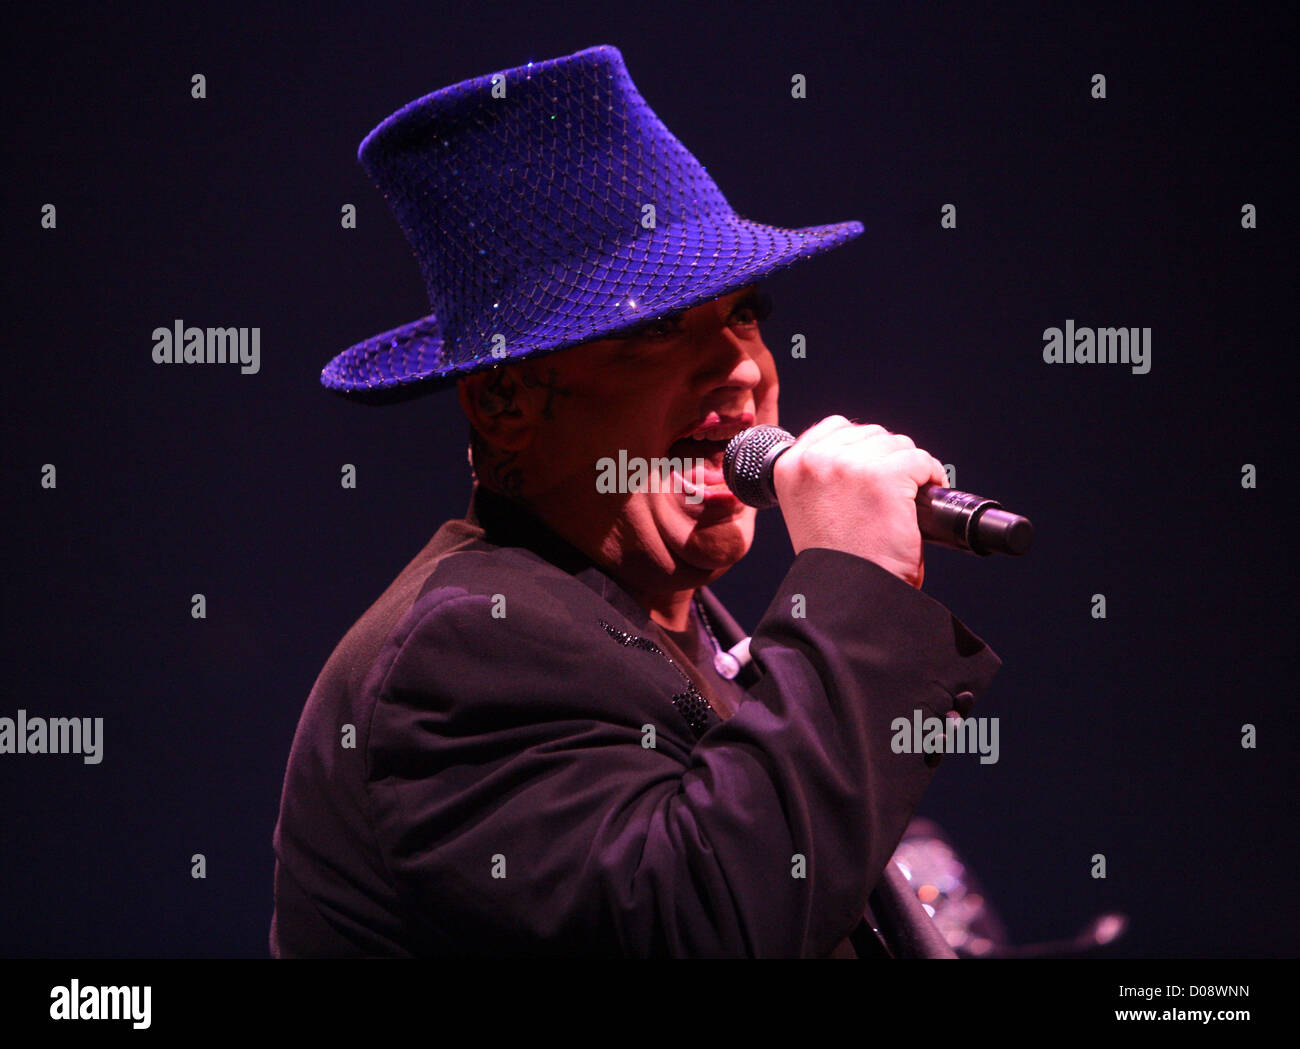 Boy George performs at Night Of The Proms at GelreDome Arnhem, The Netherlands - 13.11.10 Stock Photo